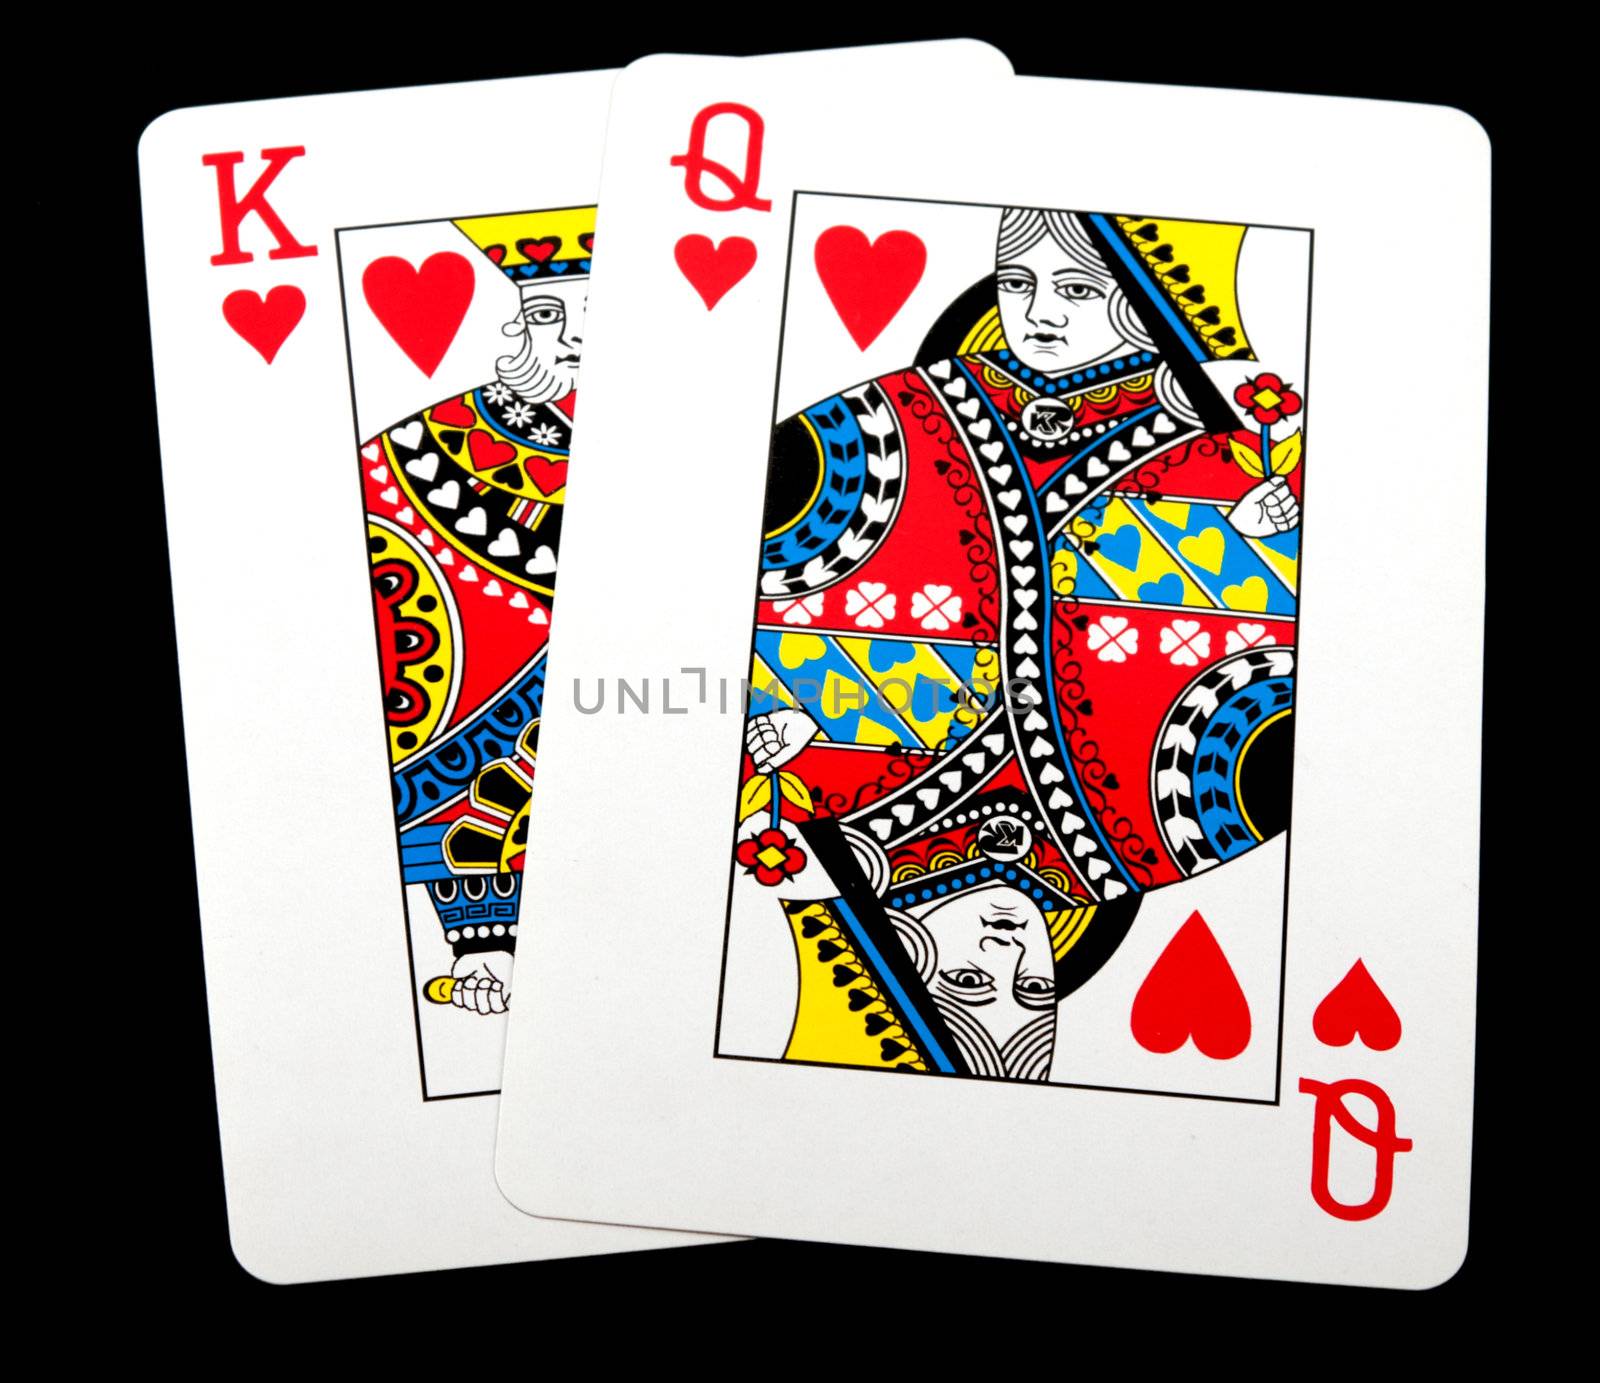 King Queen of hearts, texas hold'em starting hand